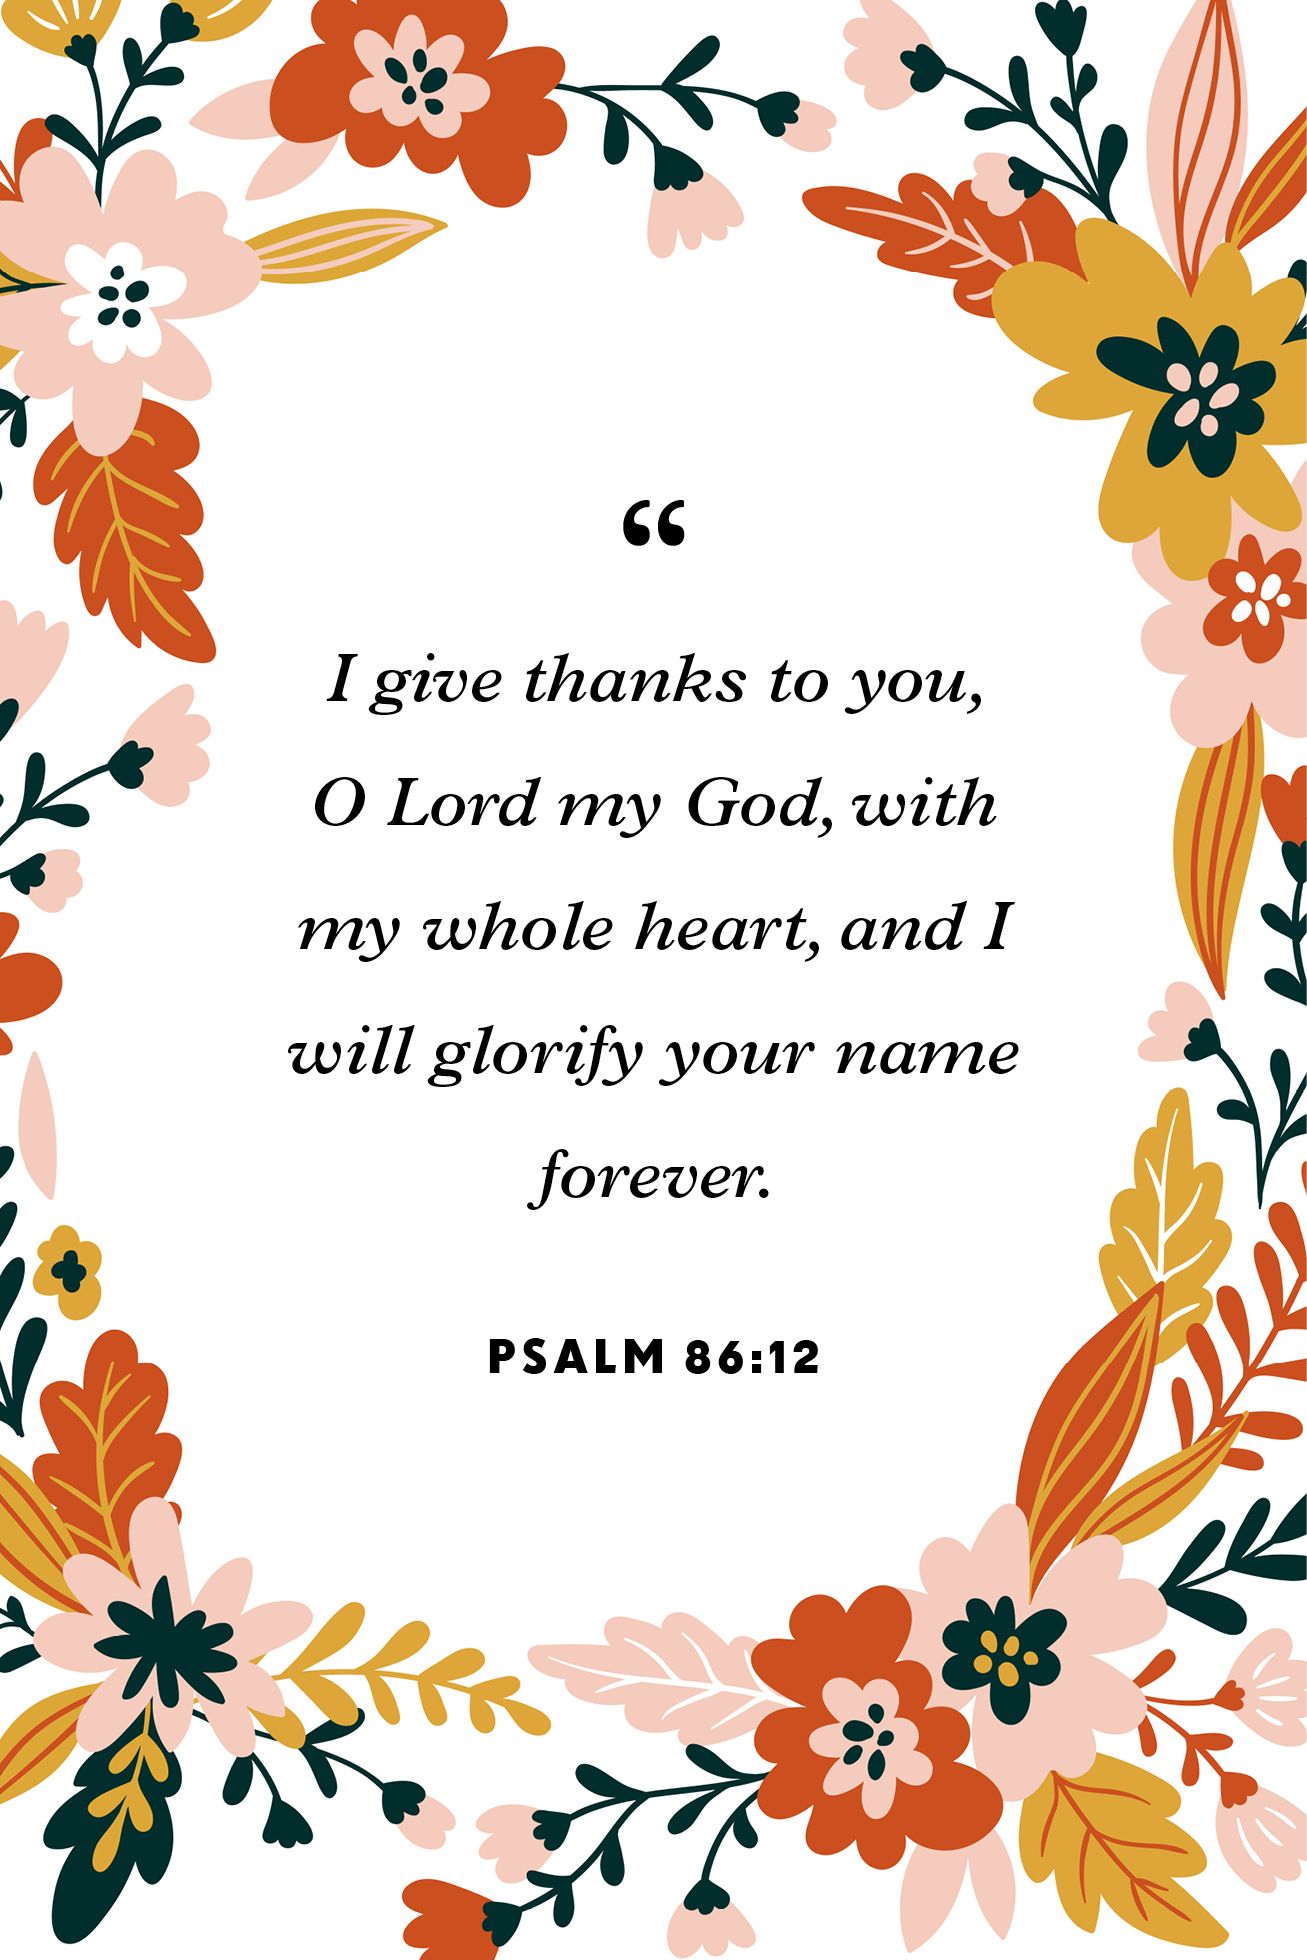 give thanks with a grateful heart scripture